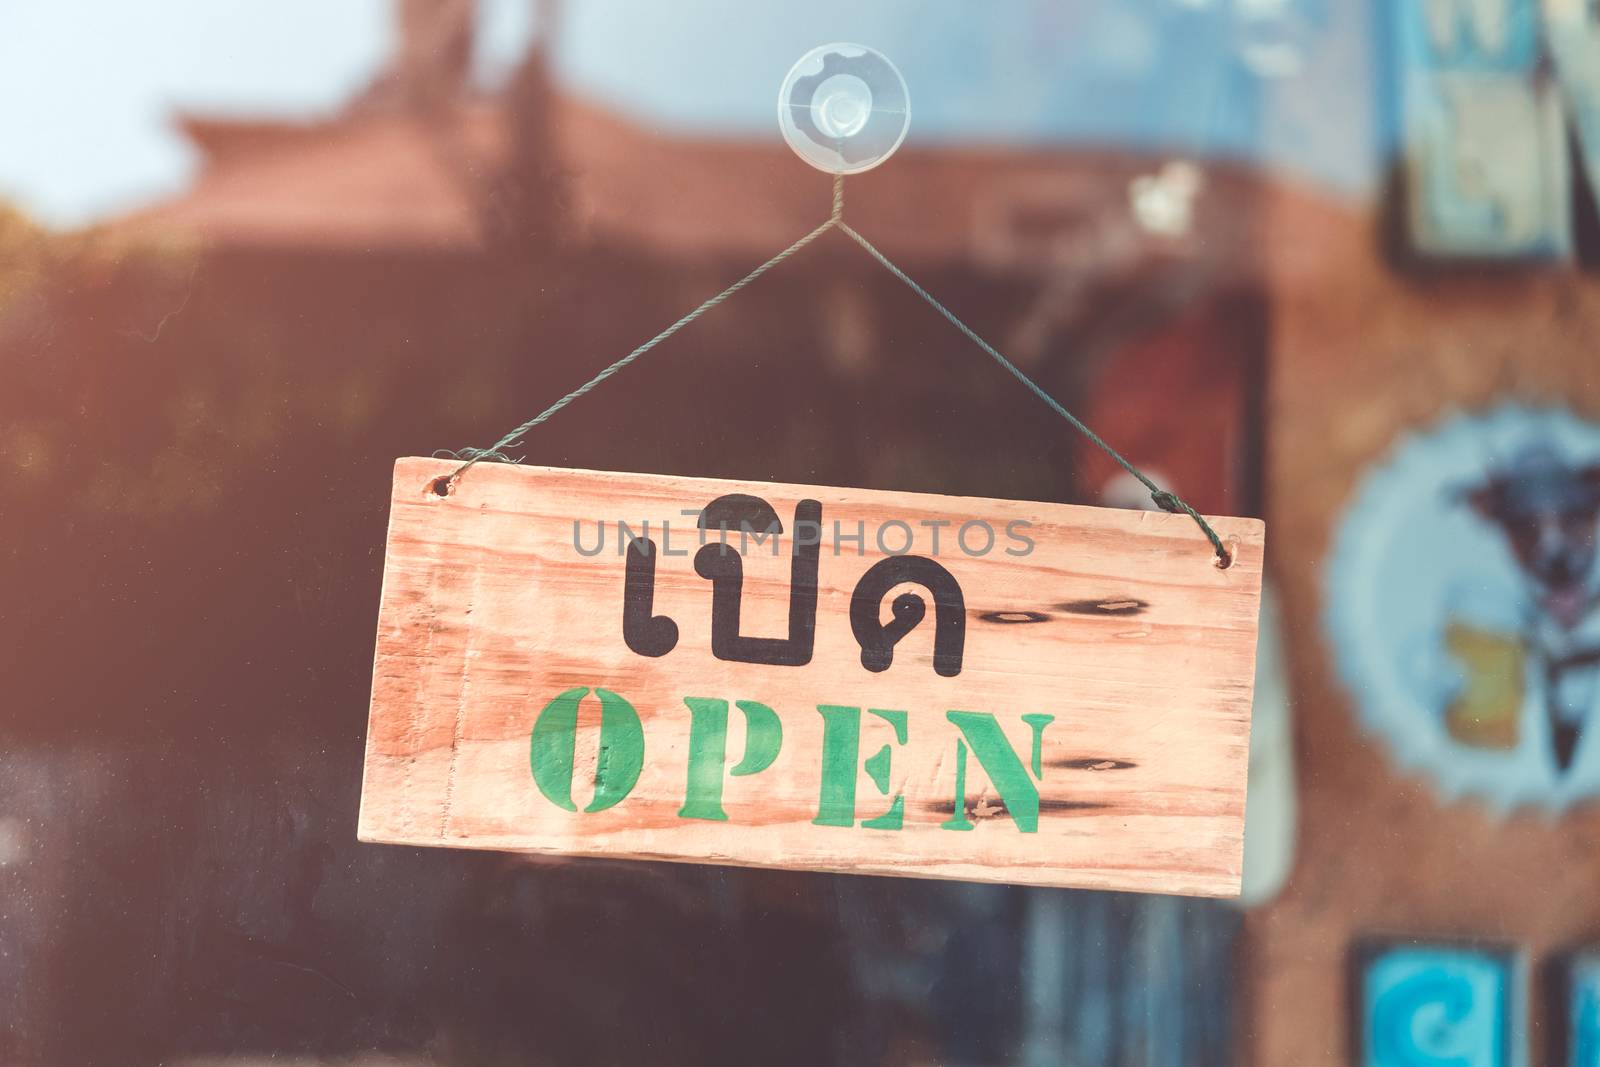 A business sign that says open on cafe or restaurant hang on door at entrance. by Suwant